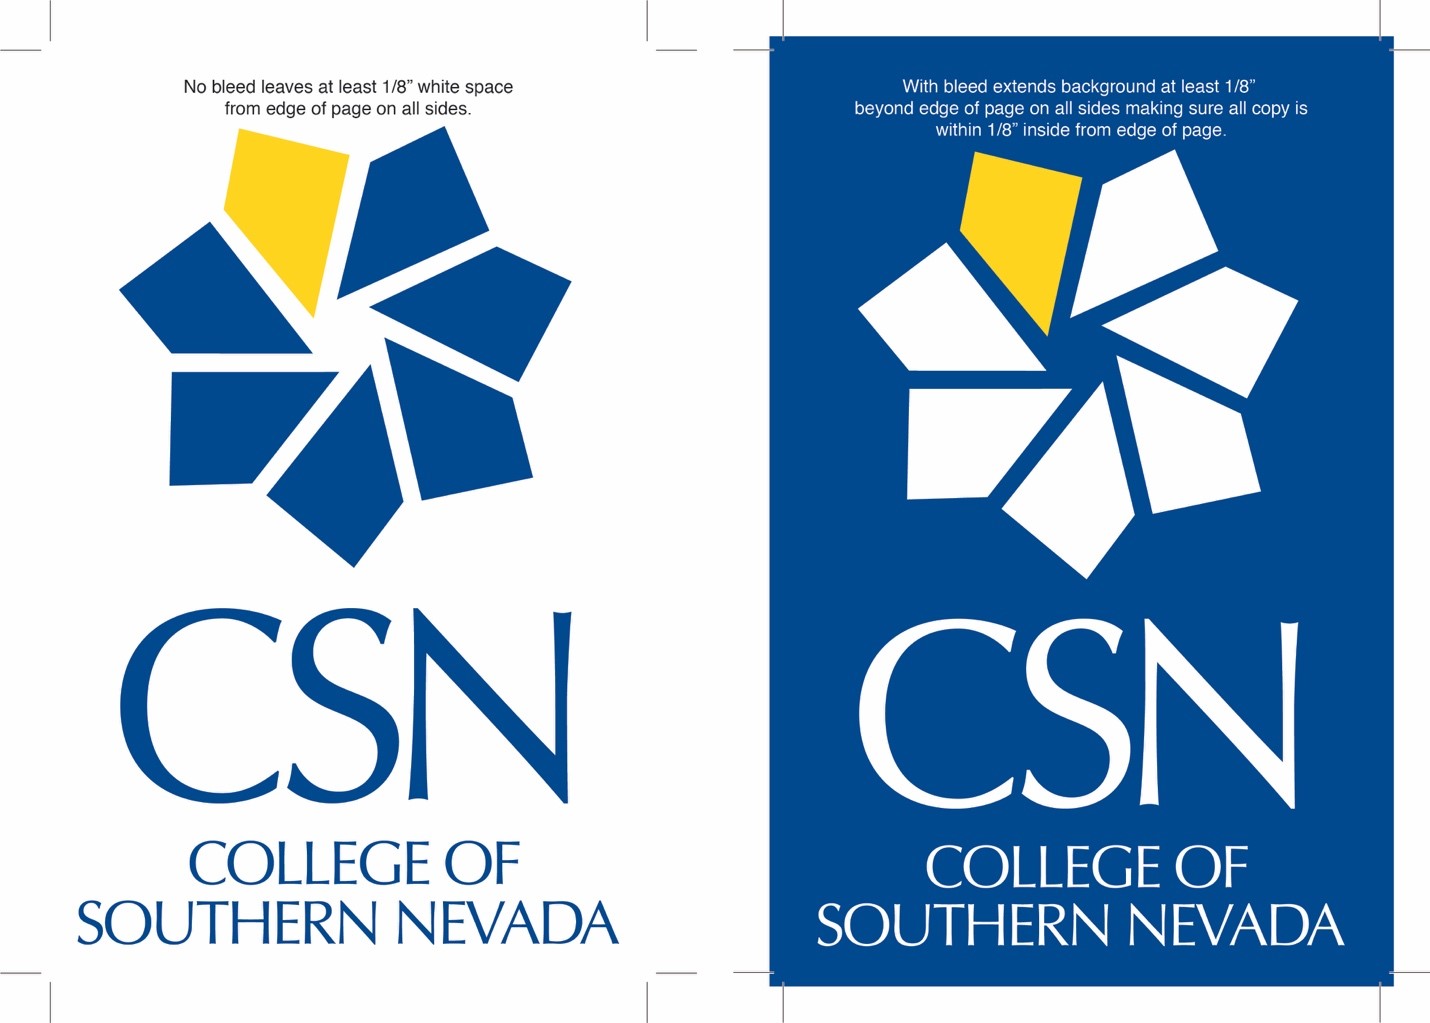 CSN Logo size and bleed printing example